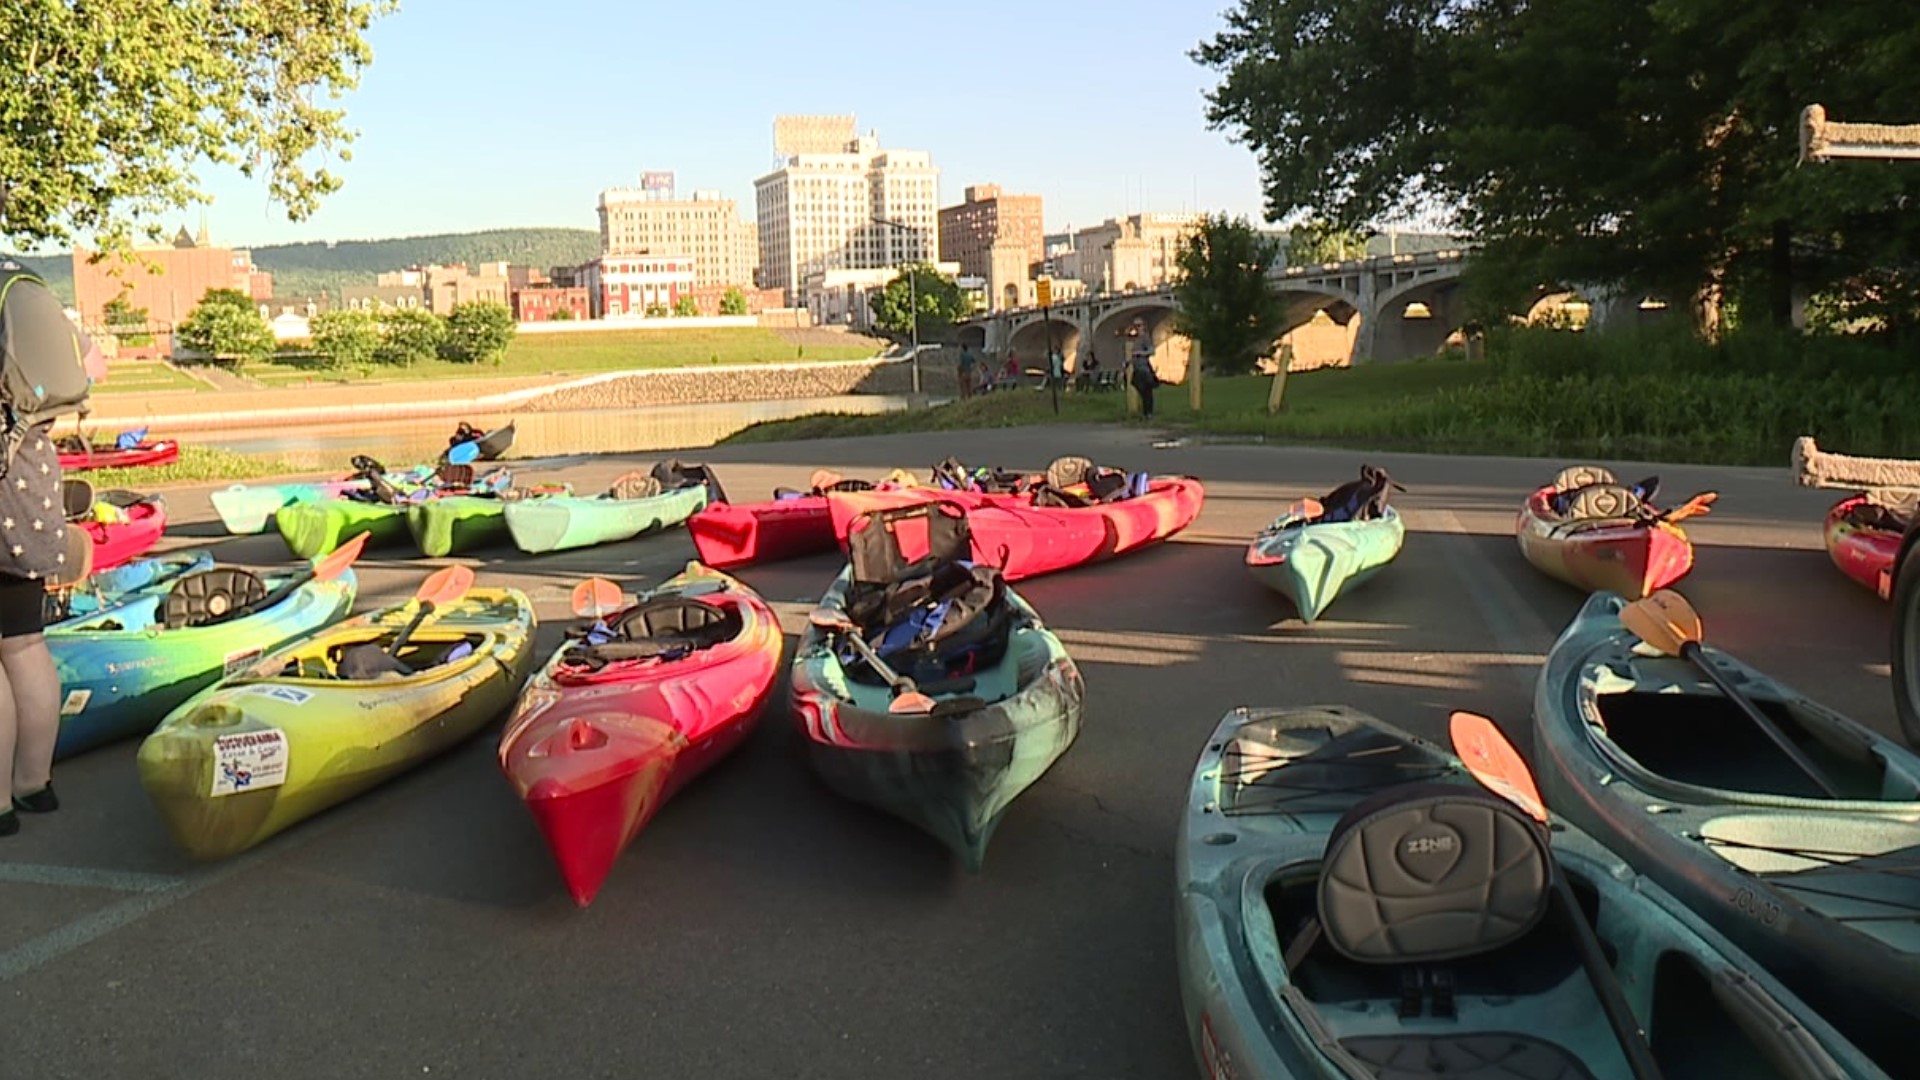 Riverfest runs from Friday to Sunday in Luzerne County.